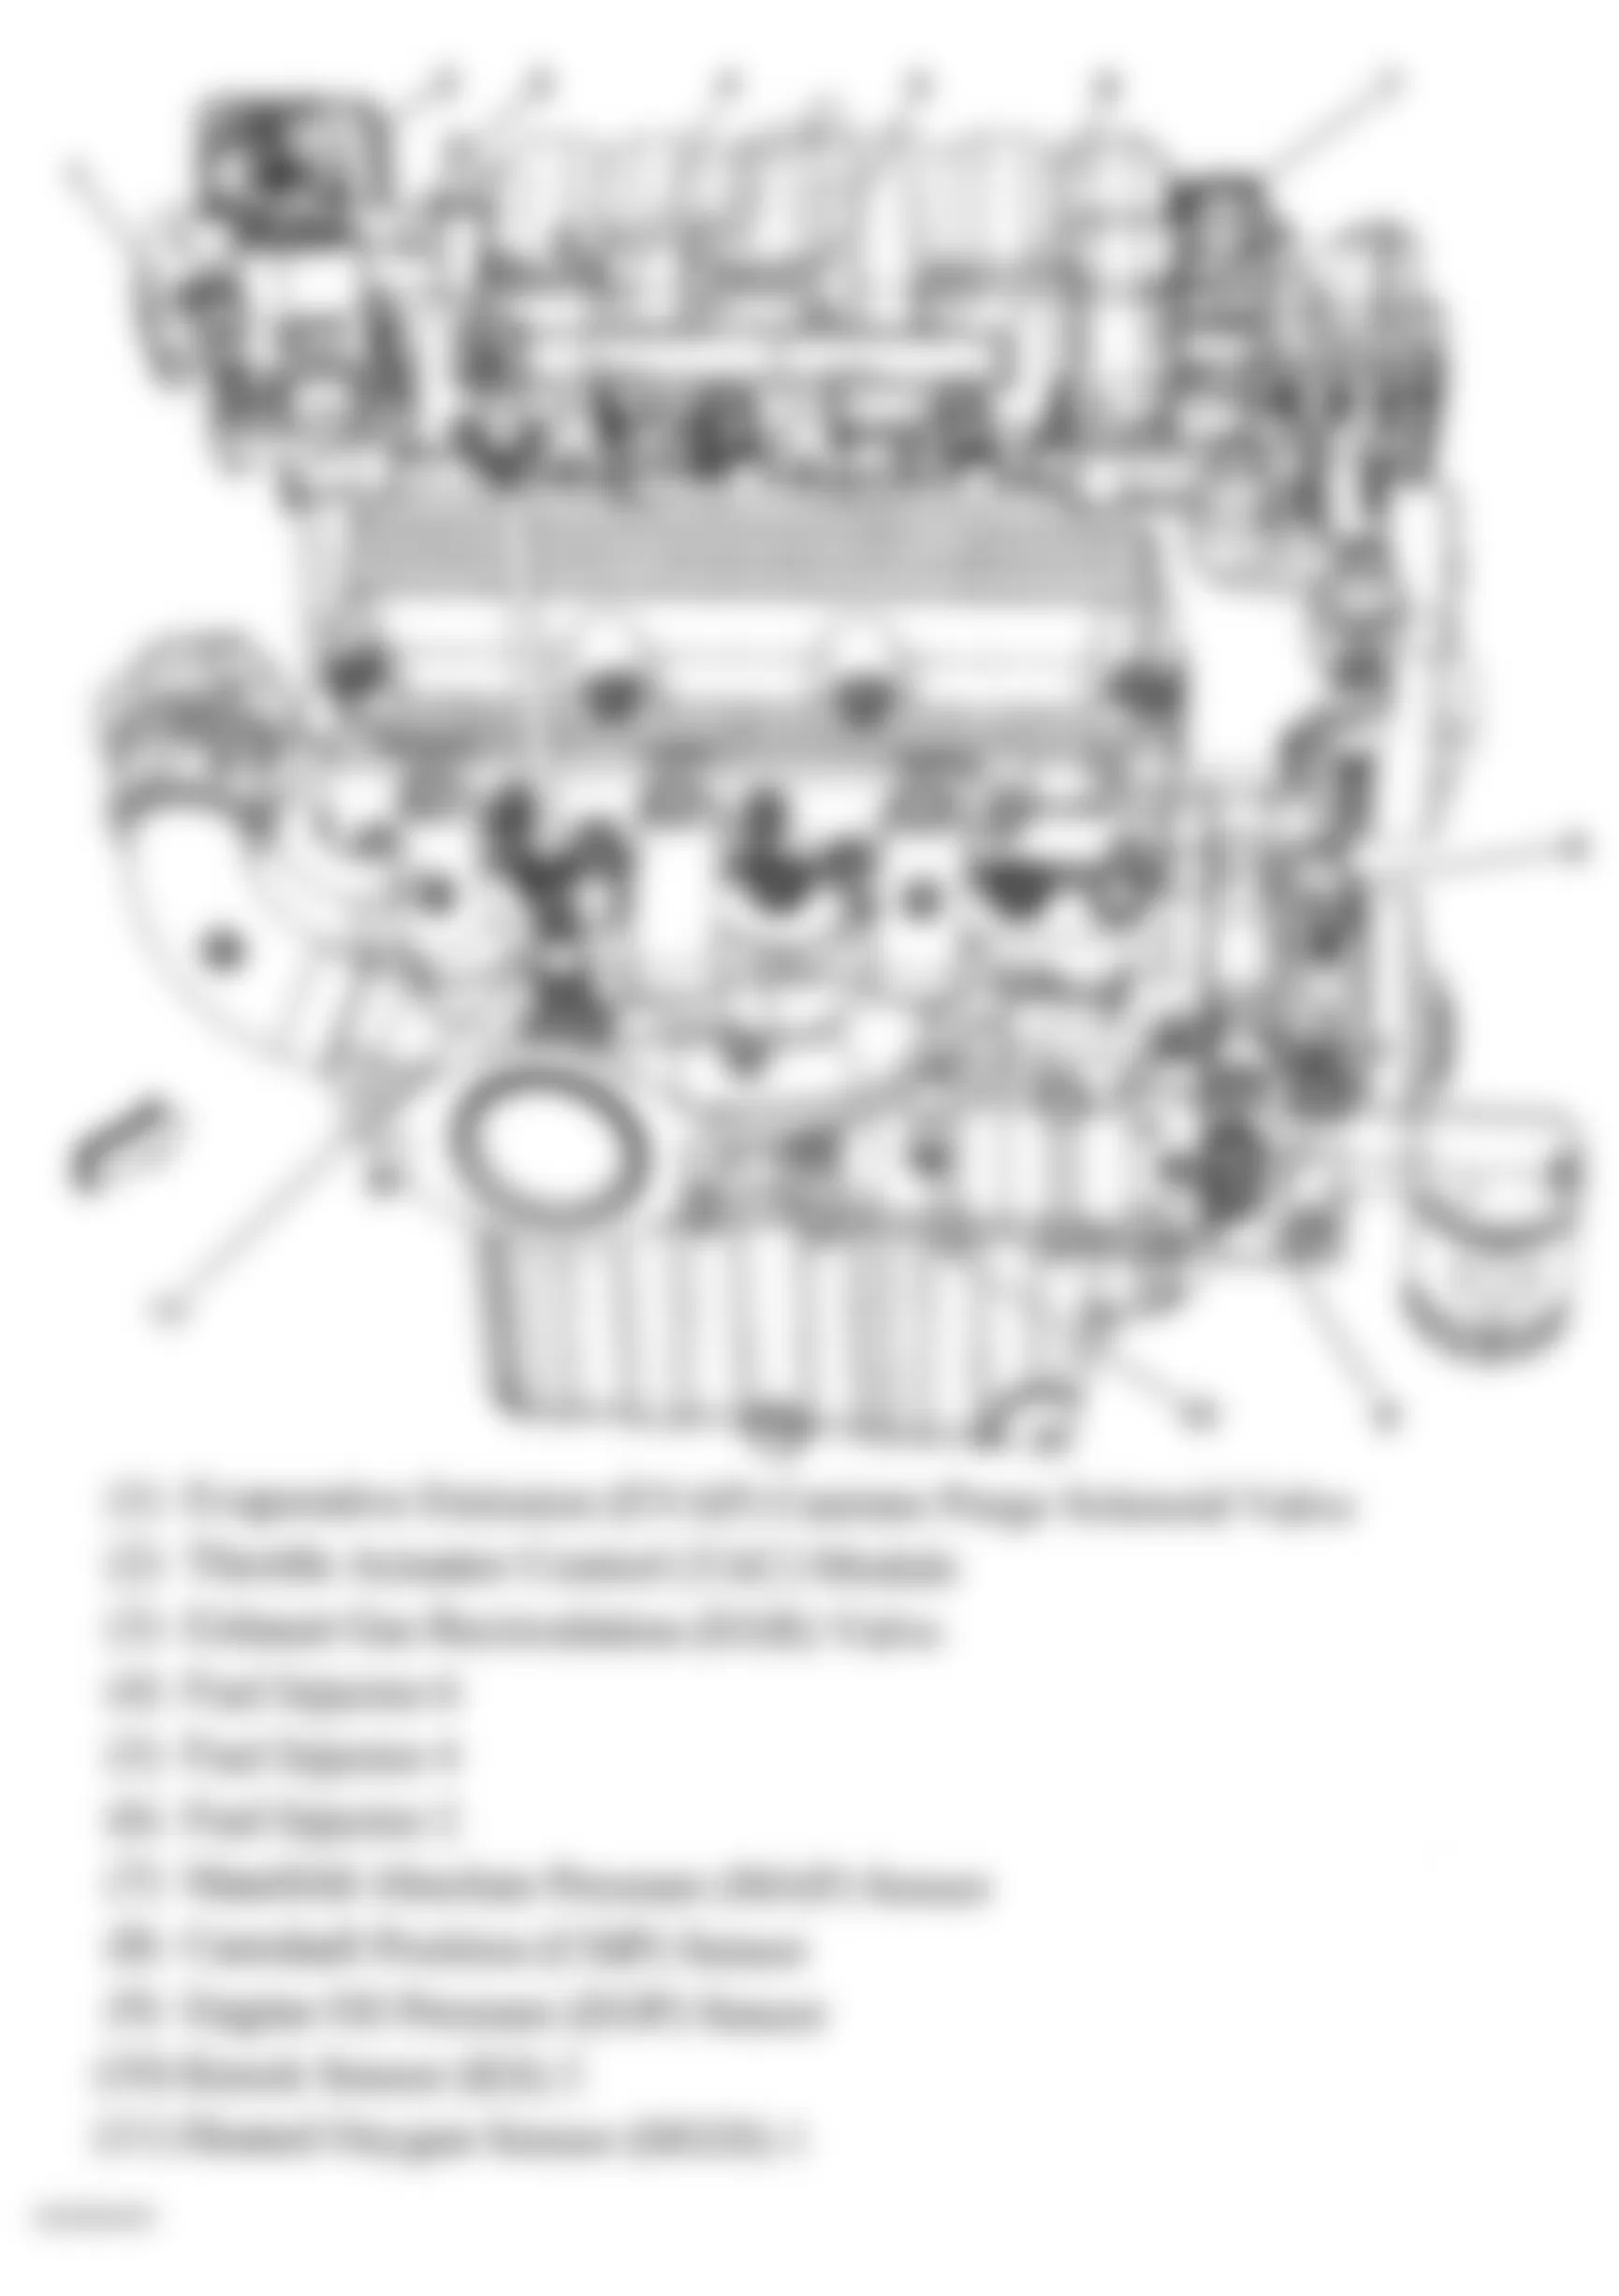 Buick Allure CXL 2008 - Component Locations -  Right Side Of Engine (3.8L)